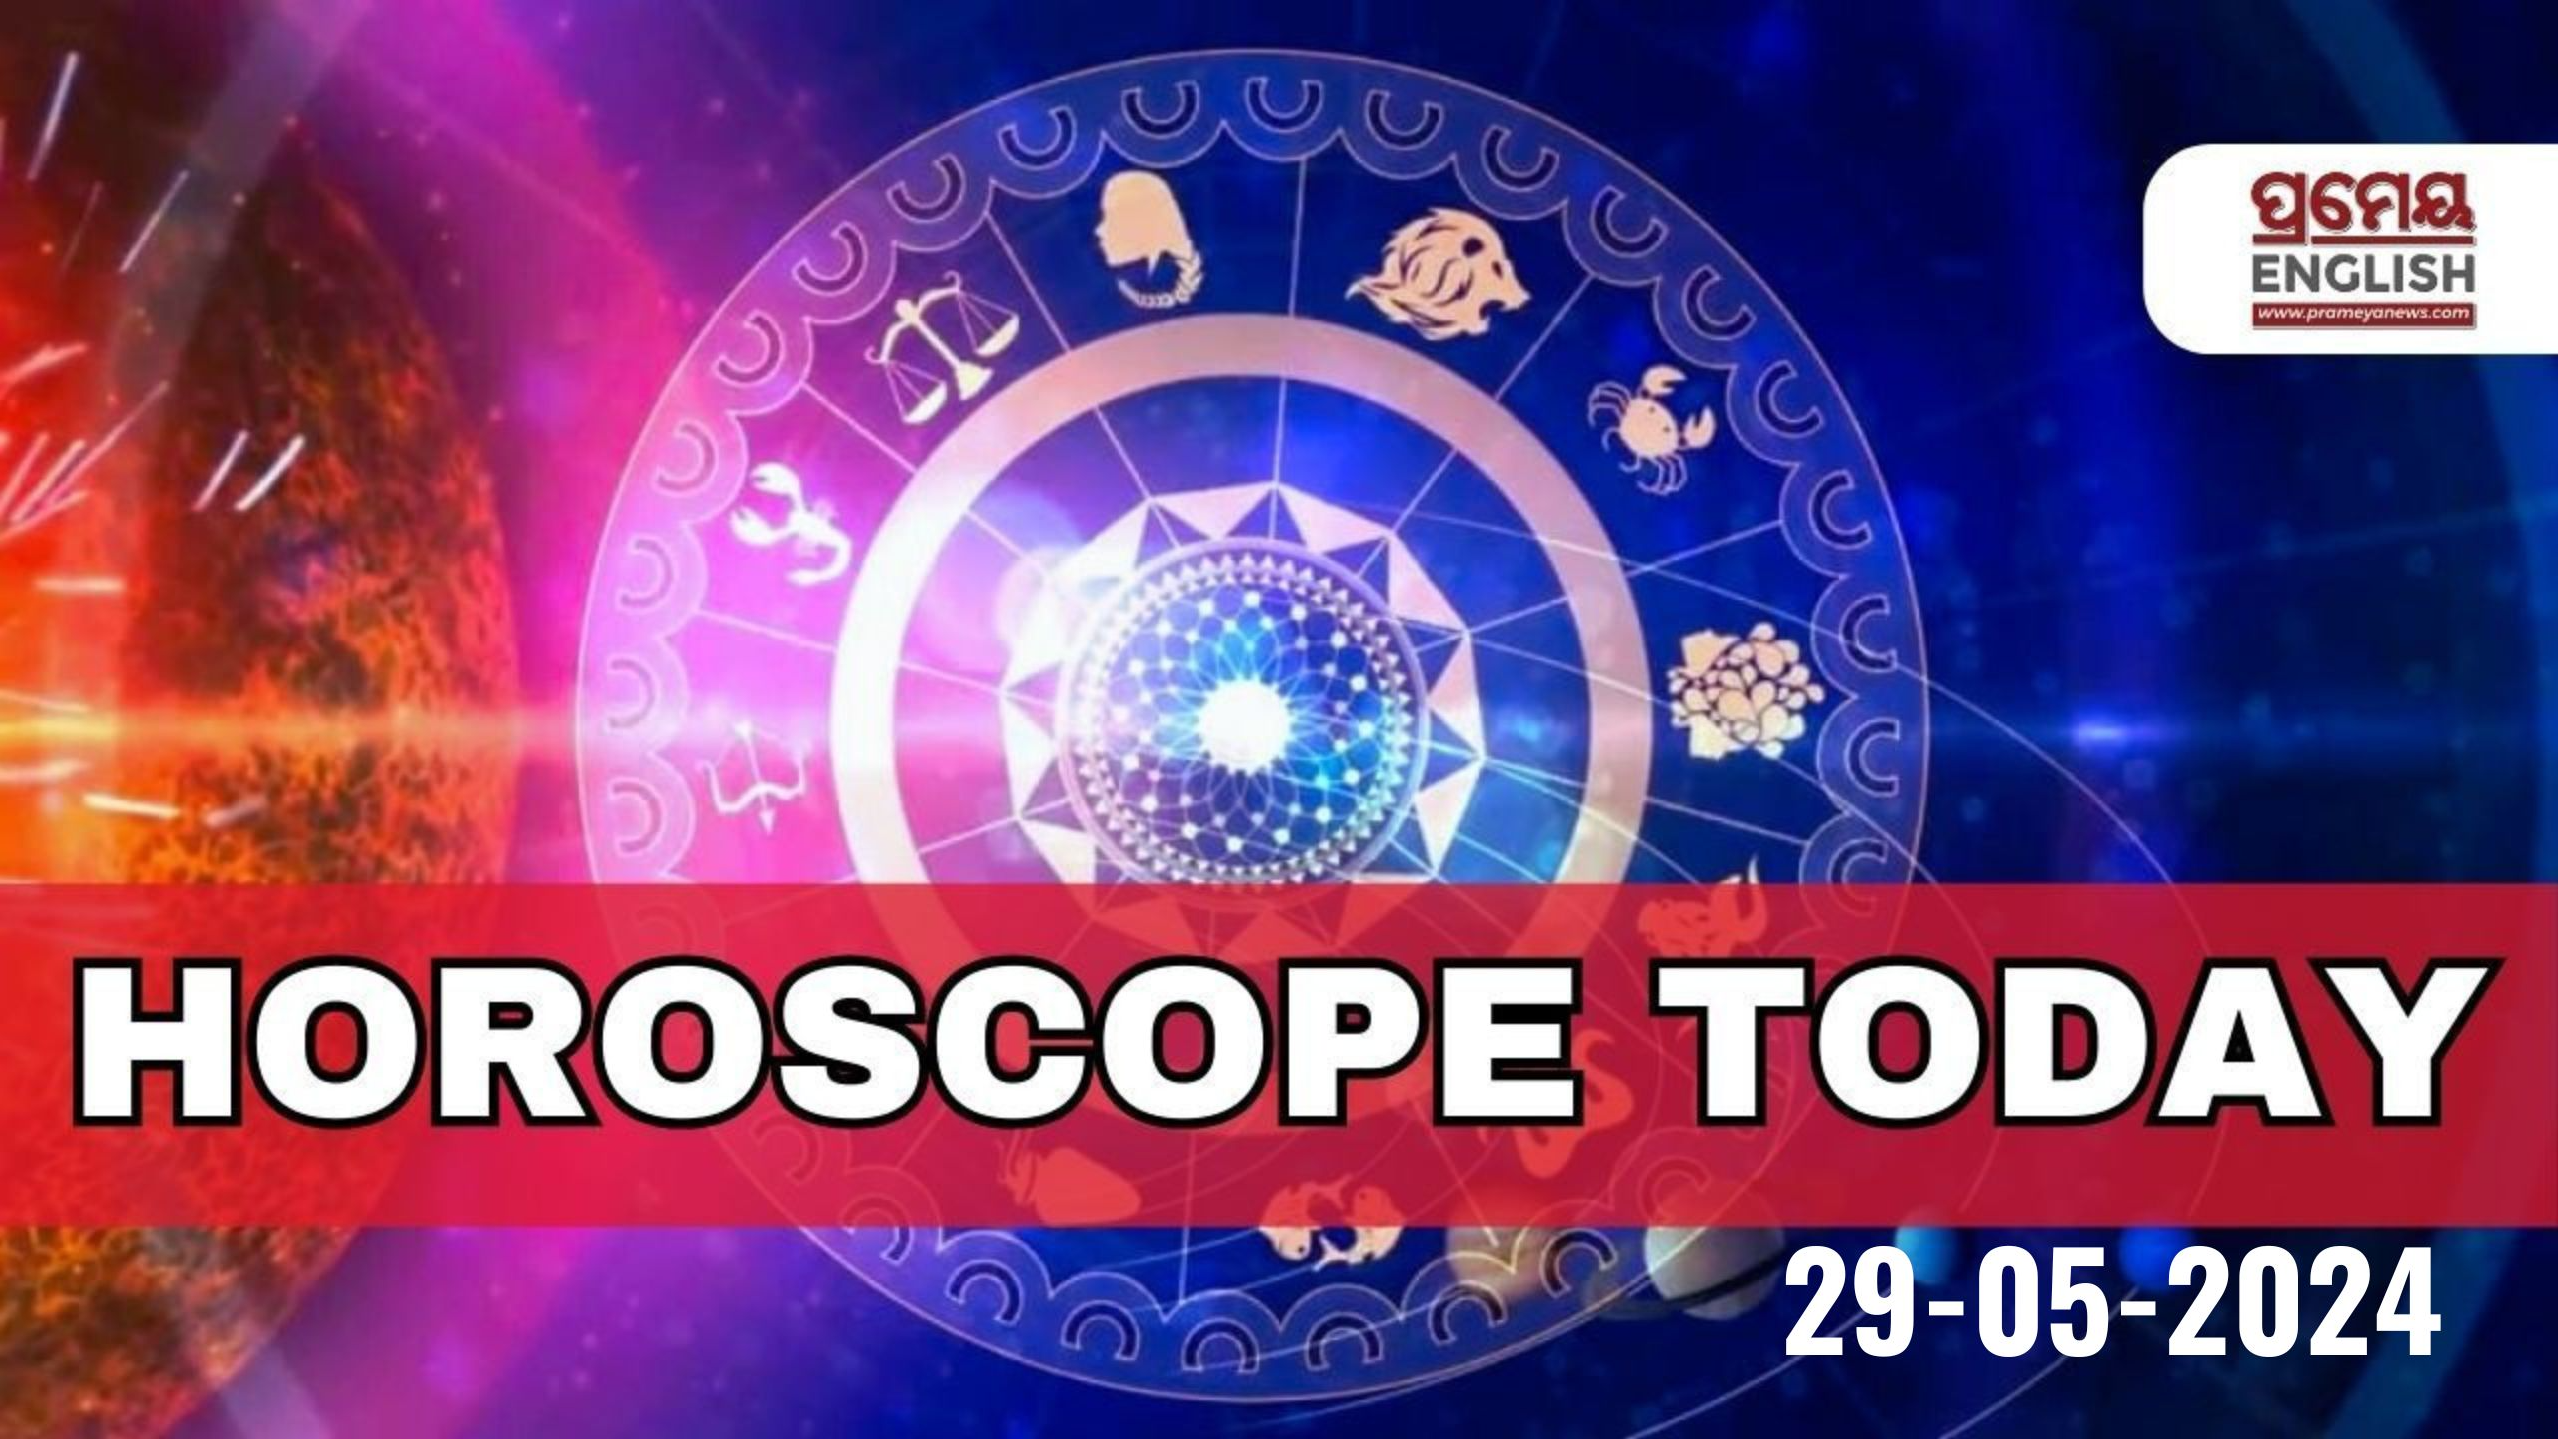 Horoscope Today: Astrological prediction for May 29, 2024